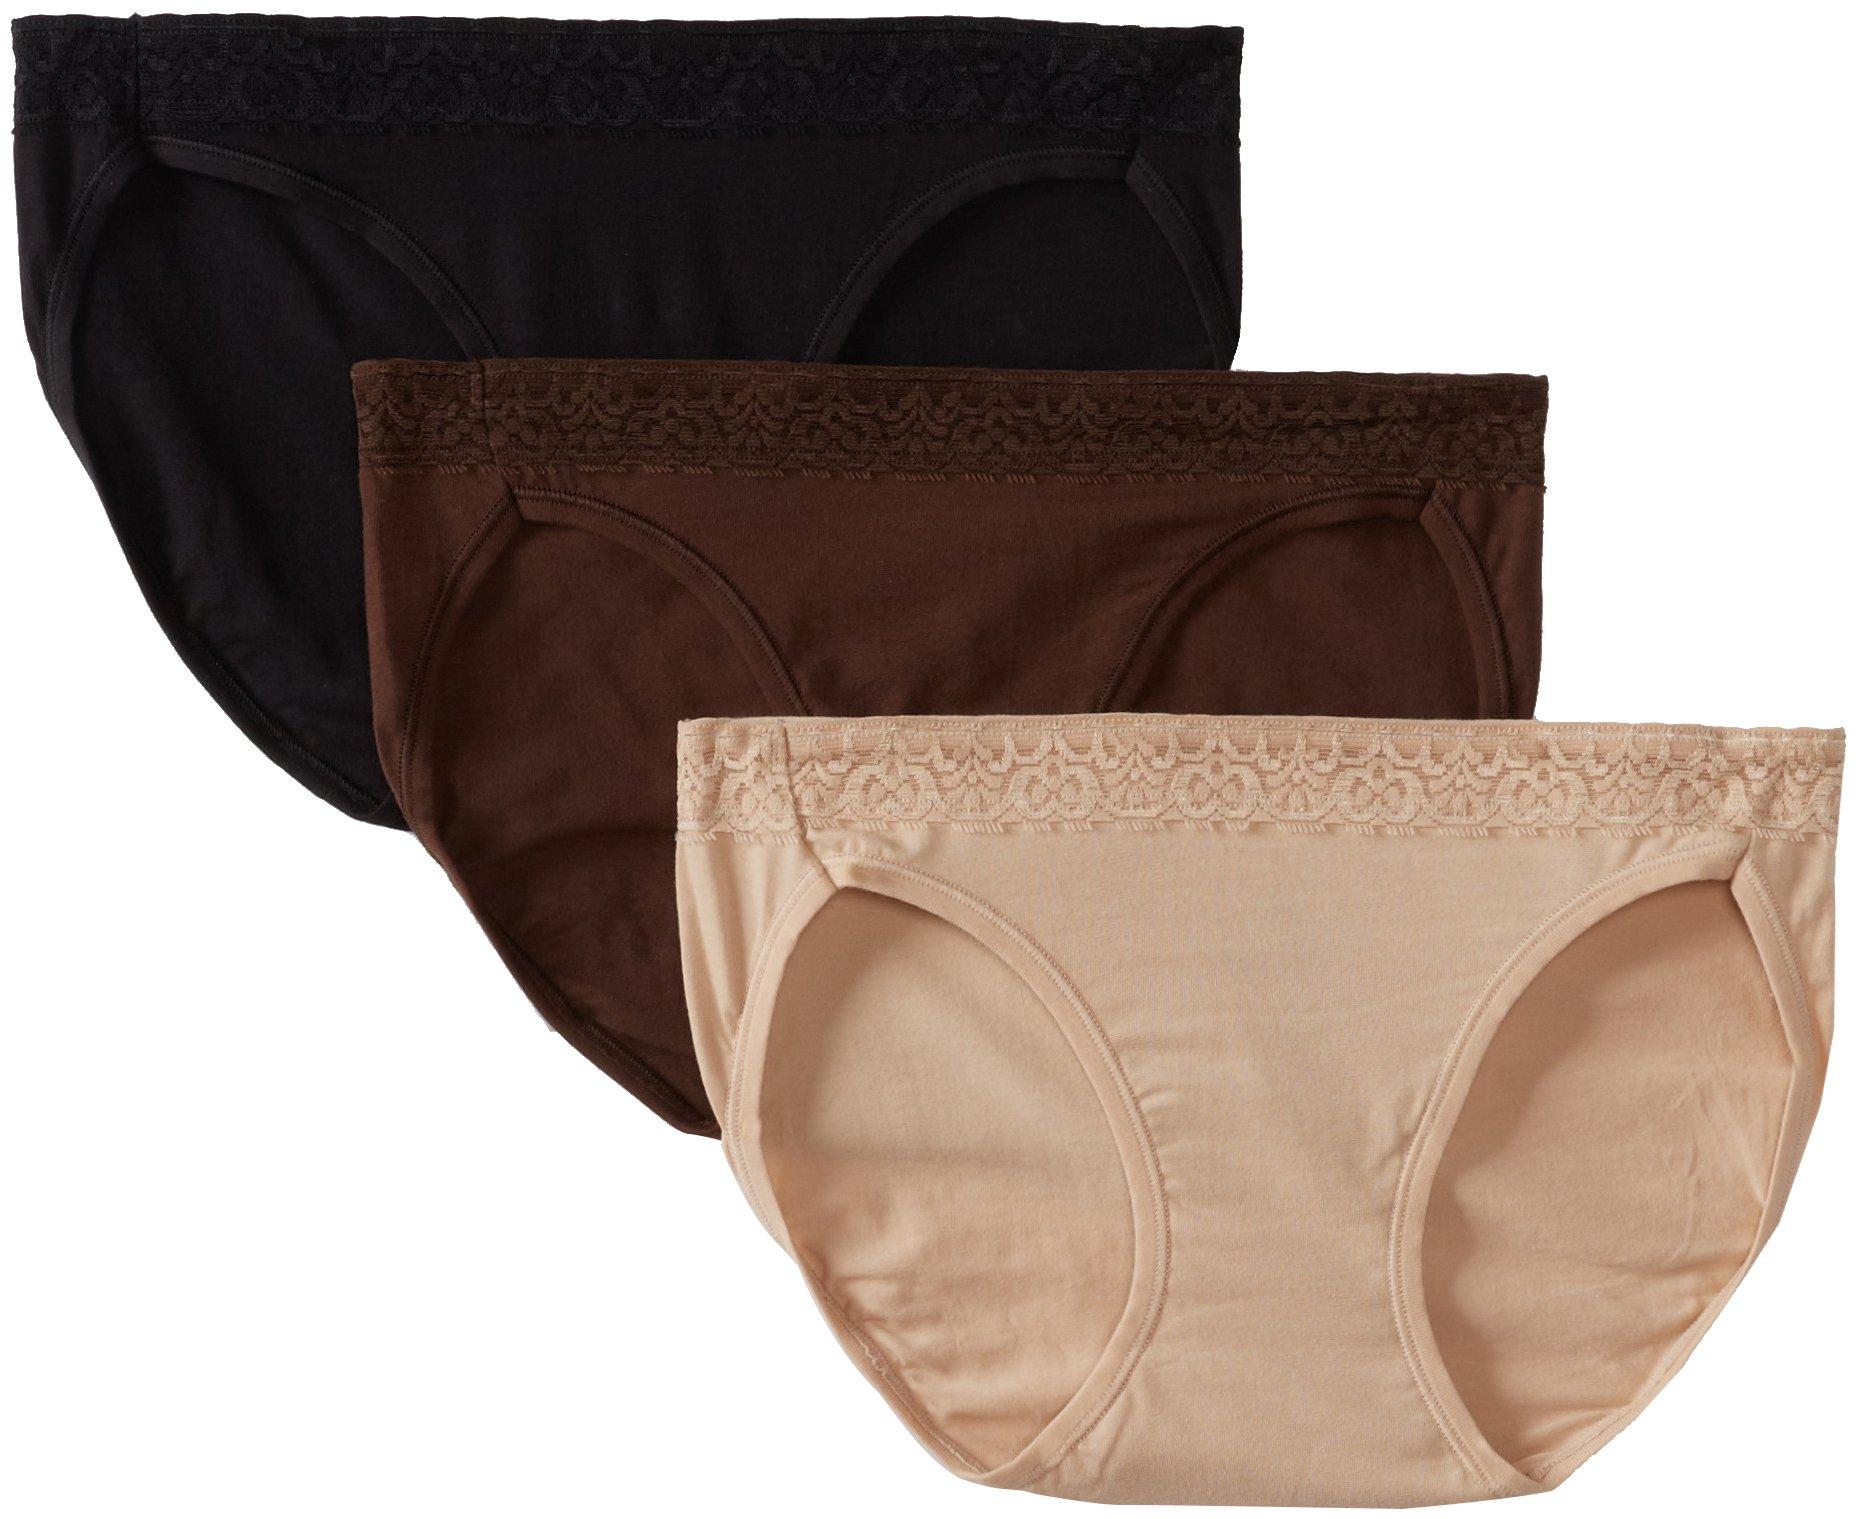 Pack of 3 Hanes Womens ComfortSoft Cotton Stretch Hipster Panty Assorted